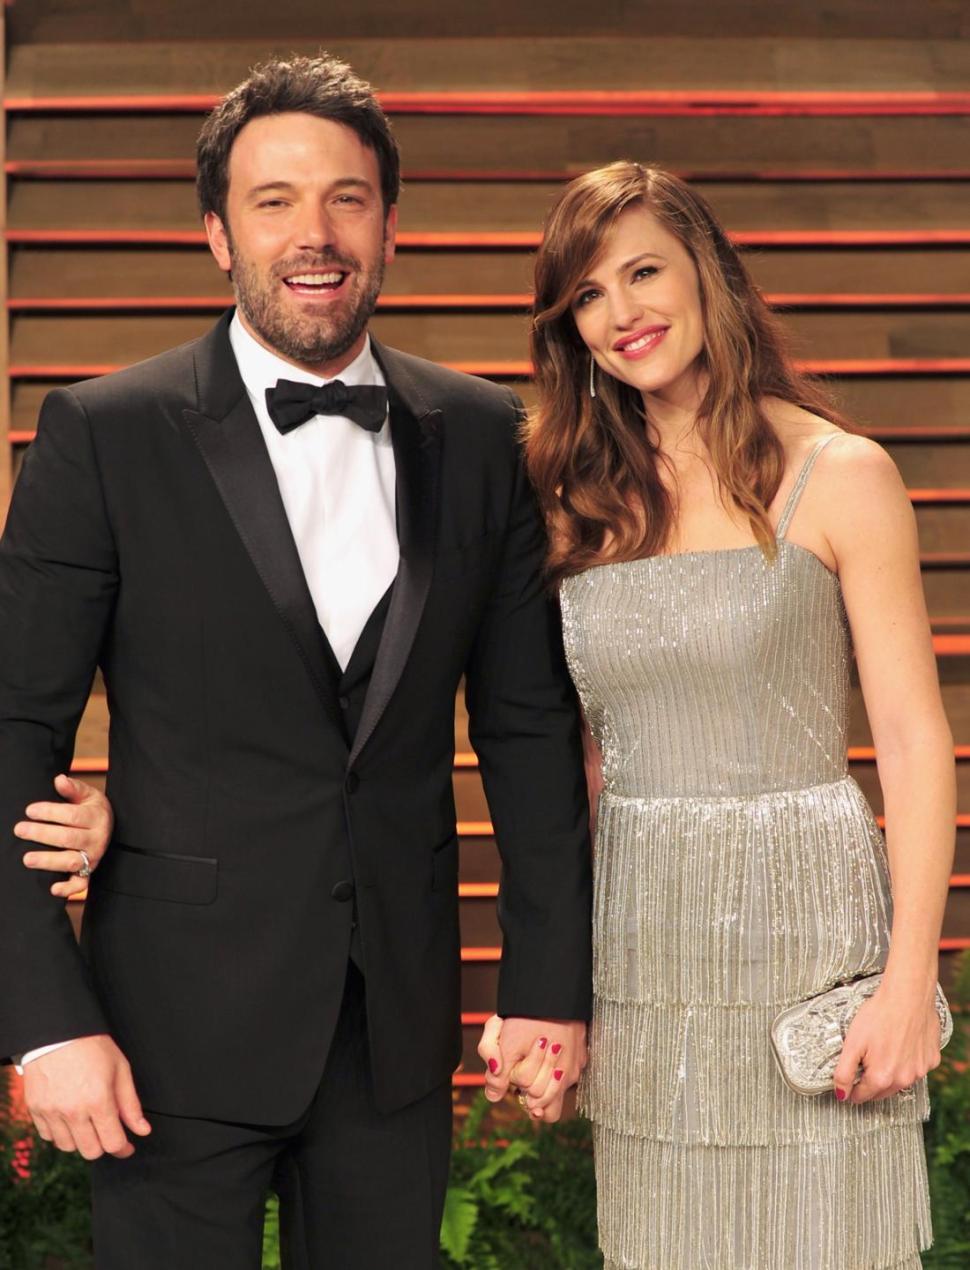 Ben Affleck, left, got himself a new Jennifer — Garner, right, now his wife and mom of their kids.